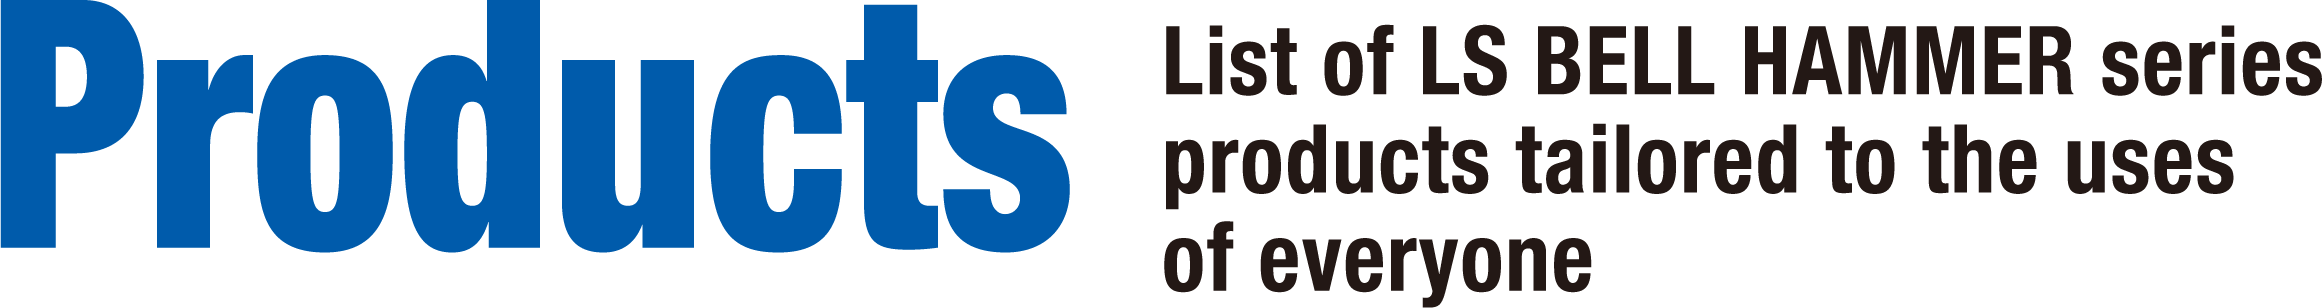 List of LS BELL HAMMER series products tailored to the uses of everyone